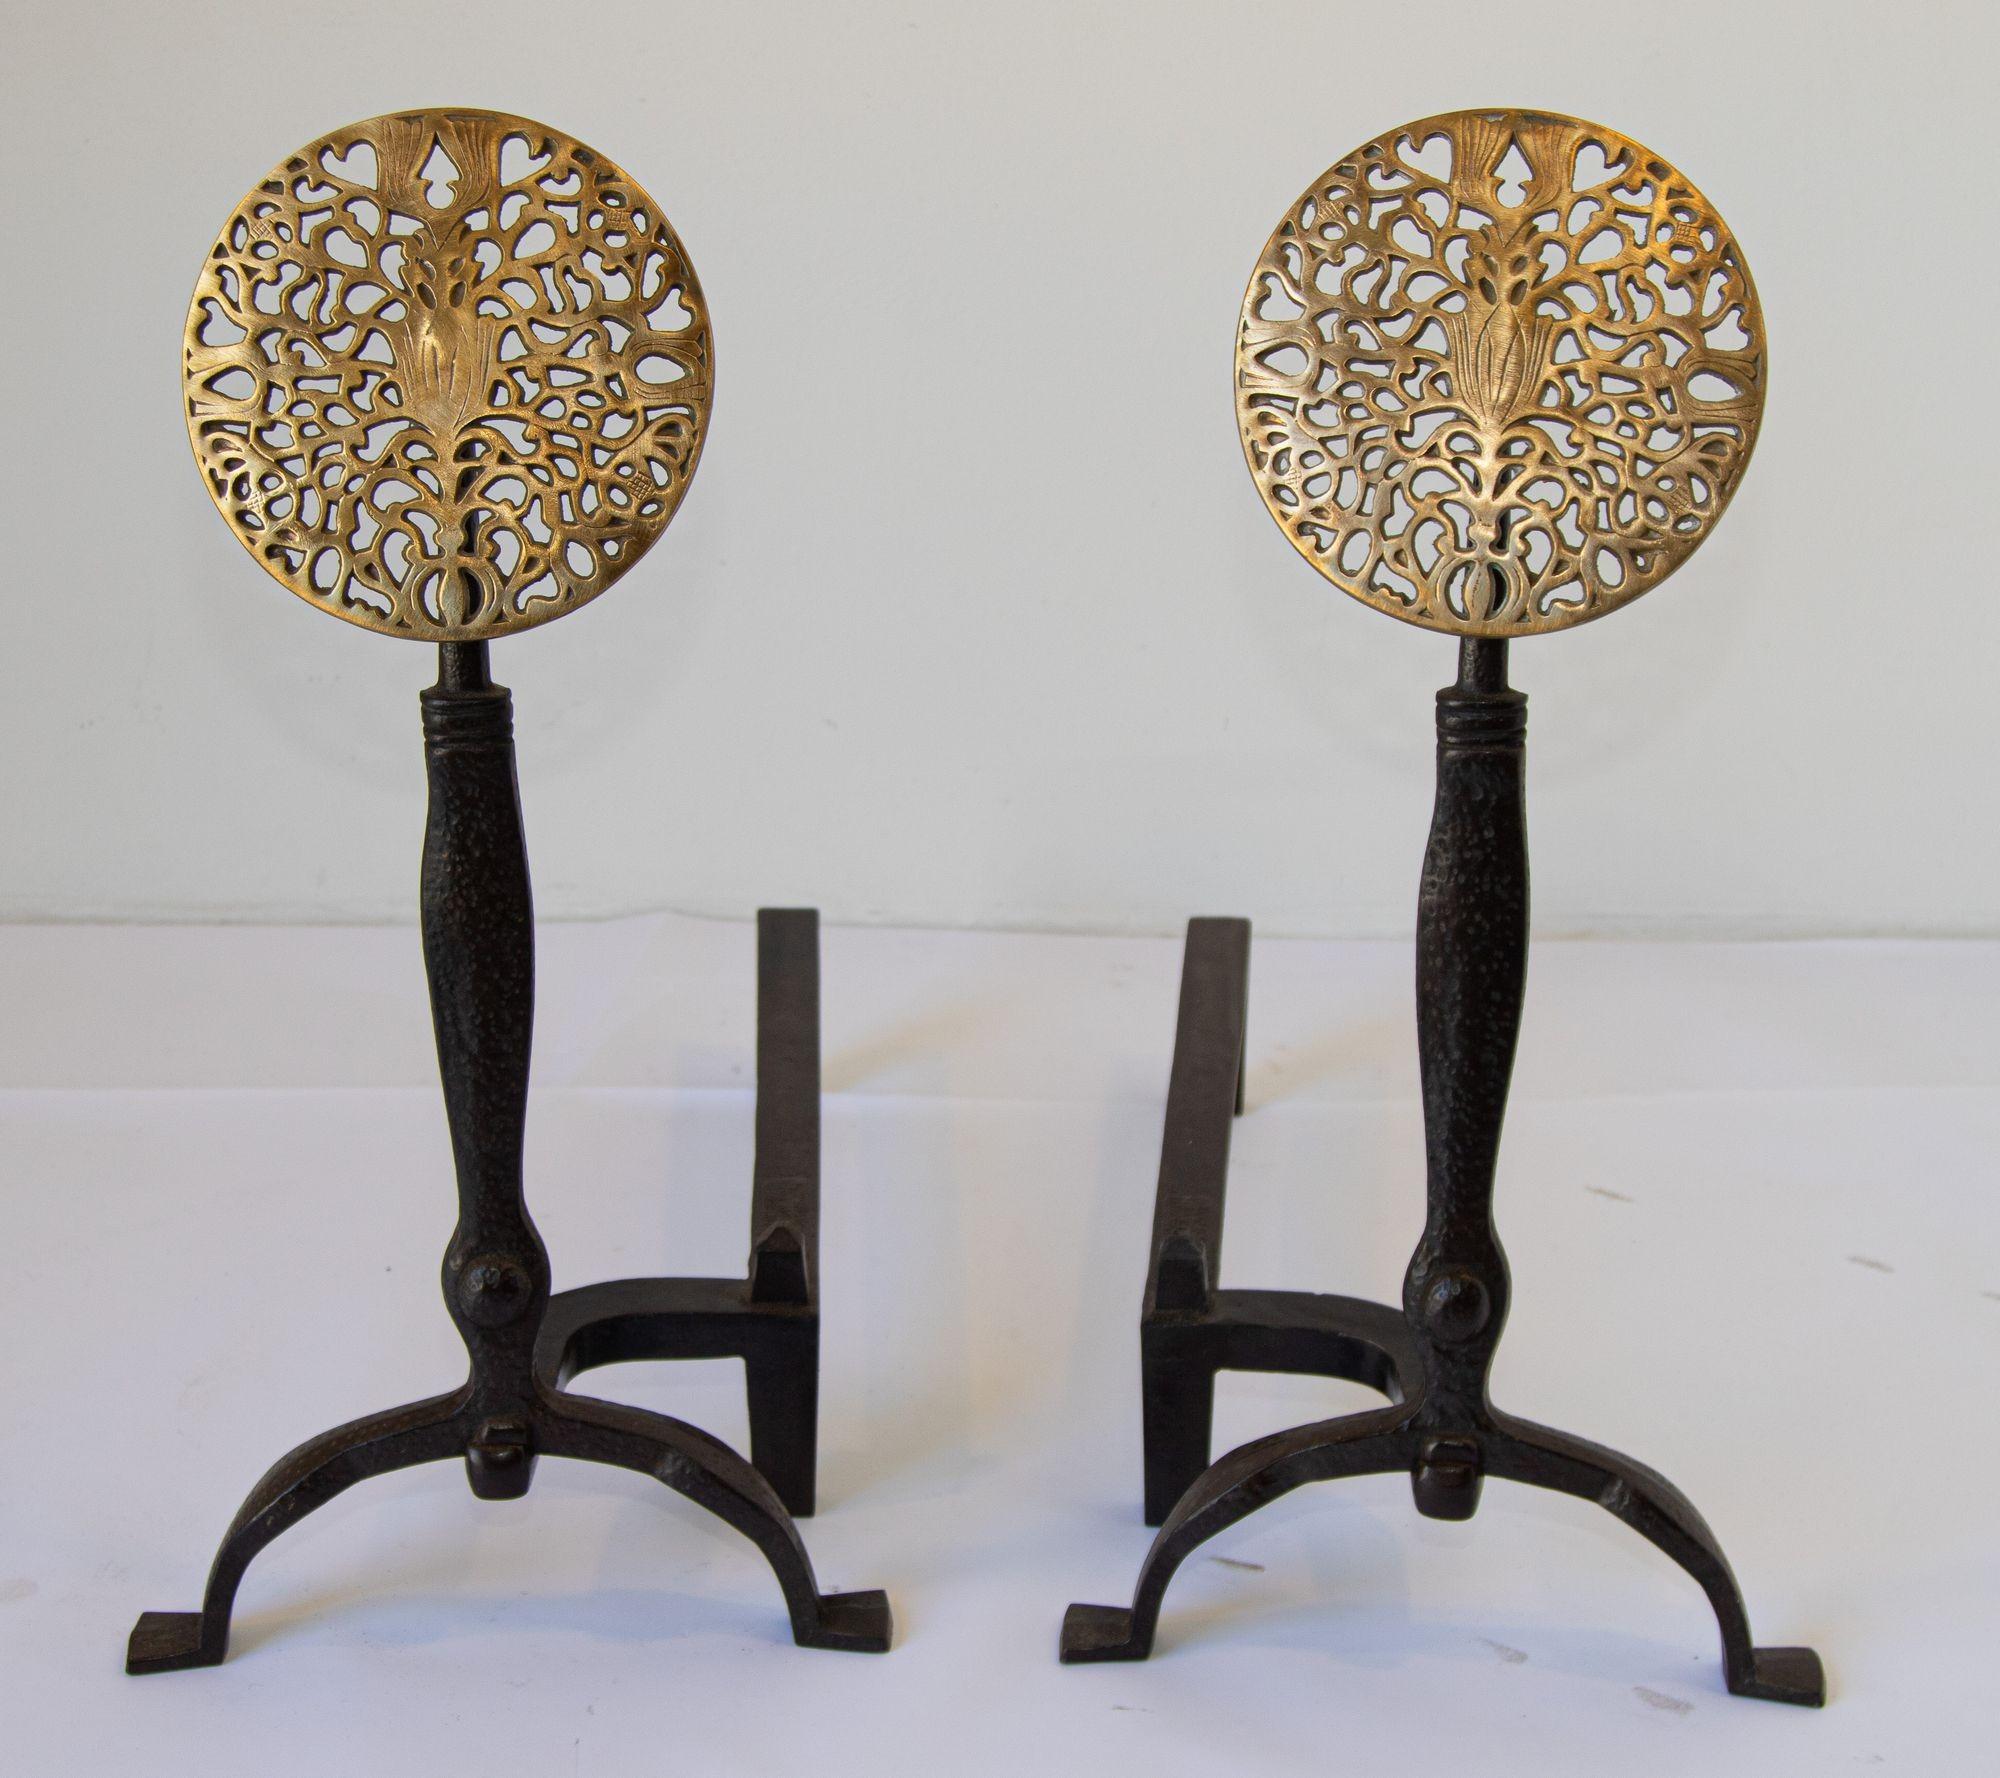 1938 Pair of Antique American Medallion Andirons by Virginia Metal Crafters For Sale 6